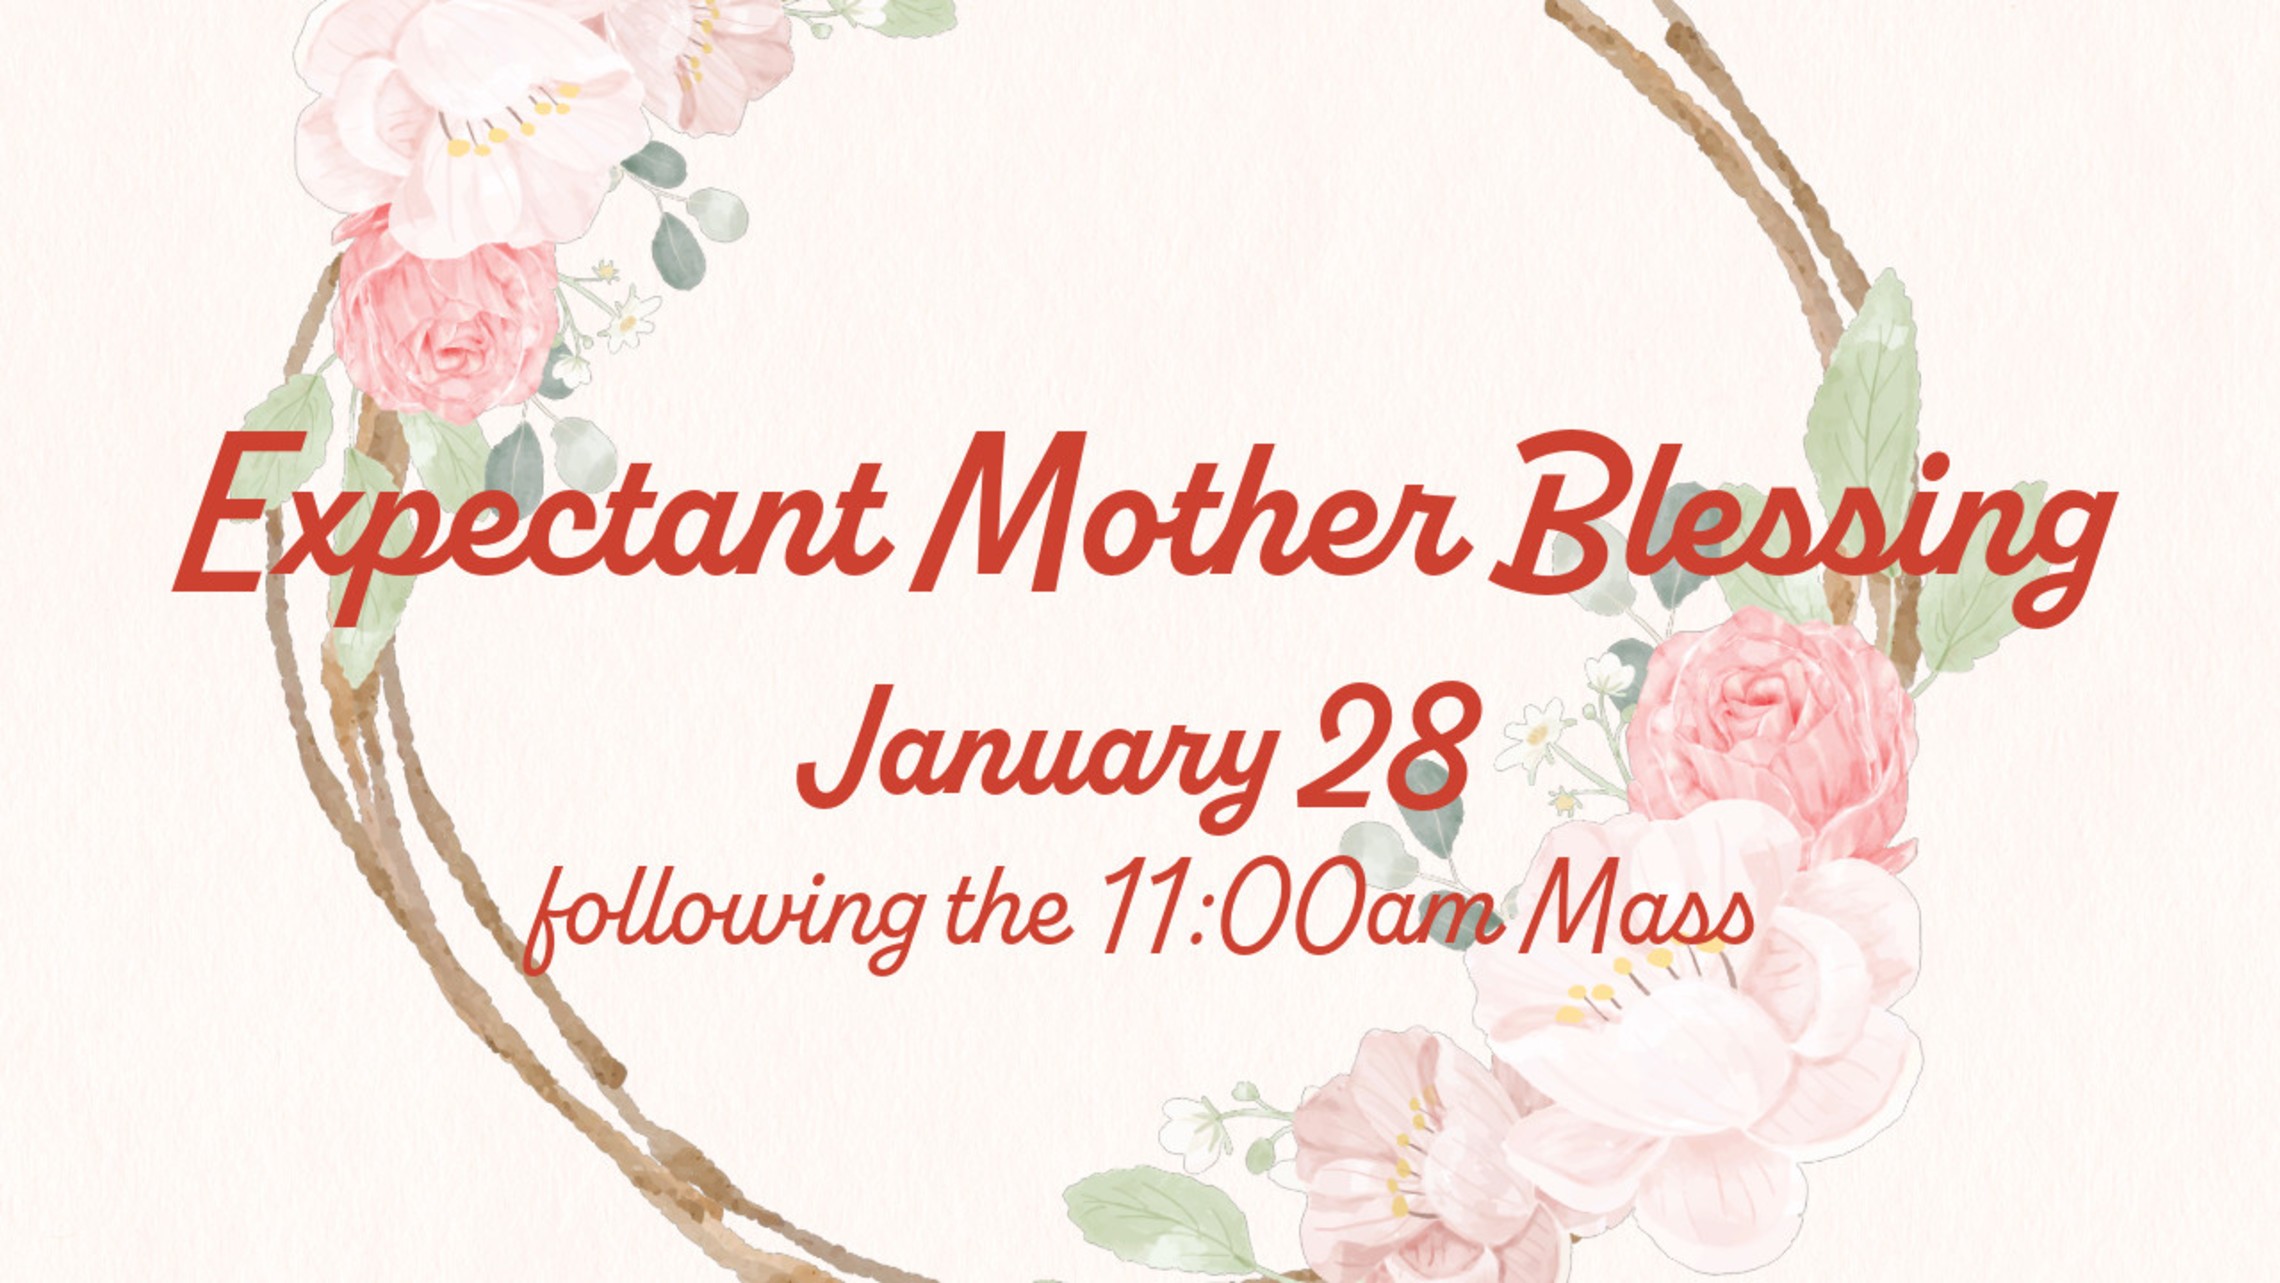 7th Annual Expectant Mothers Blessing